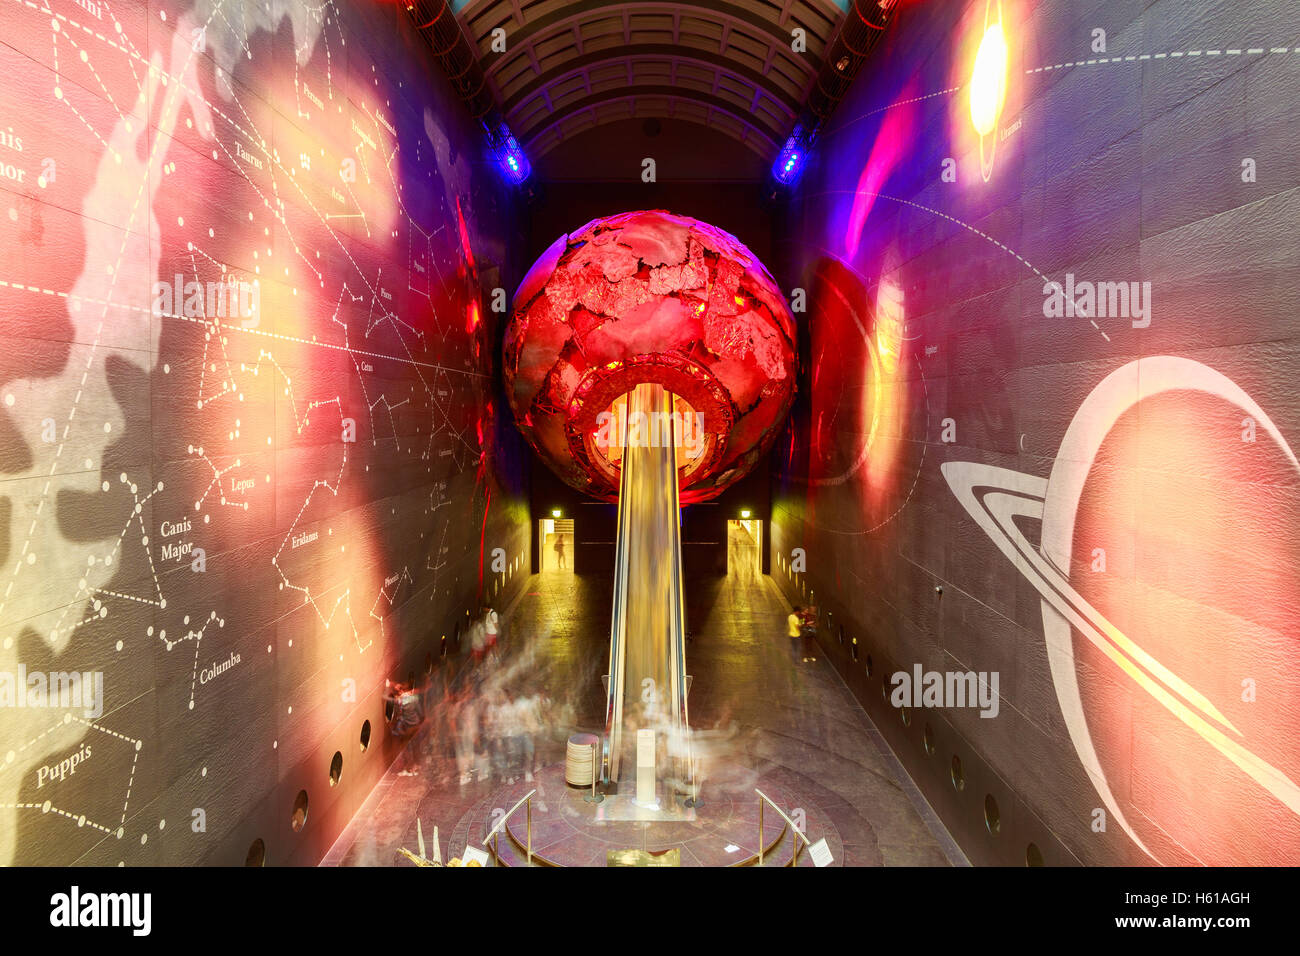 London, UK - July 28, 2016 - The entrance to the Earth Galleries in the Natural History Museum Stock Photo